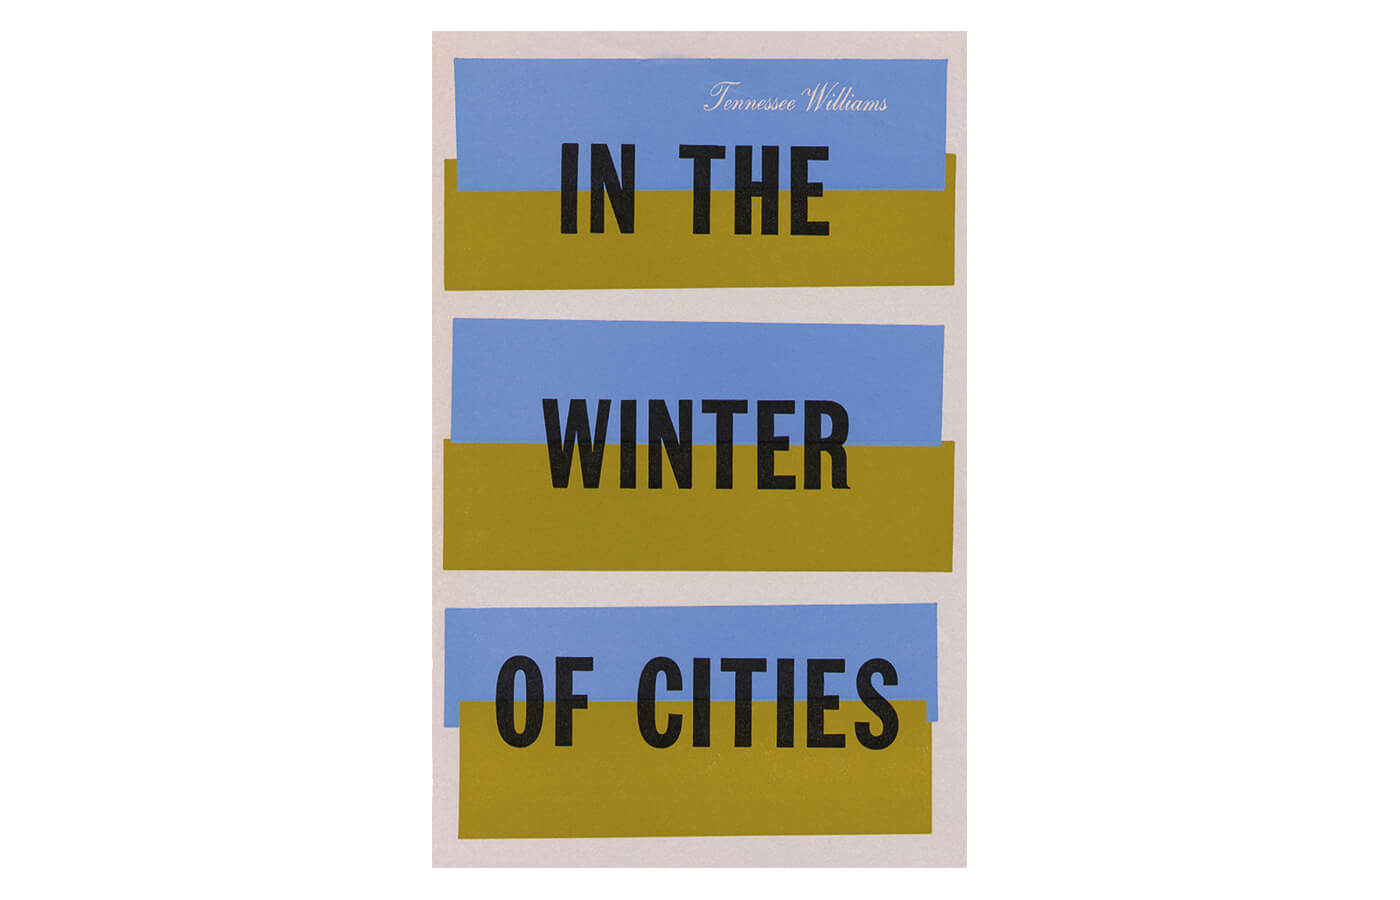 In the Winter of Cities